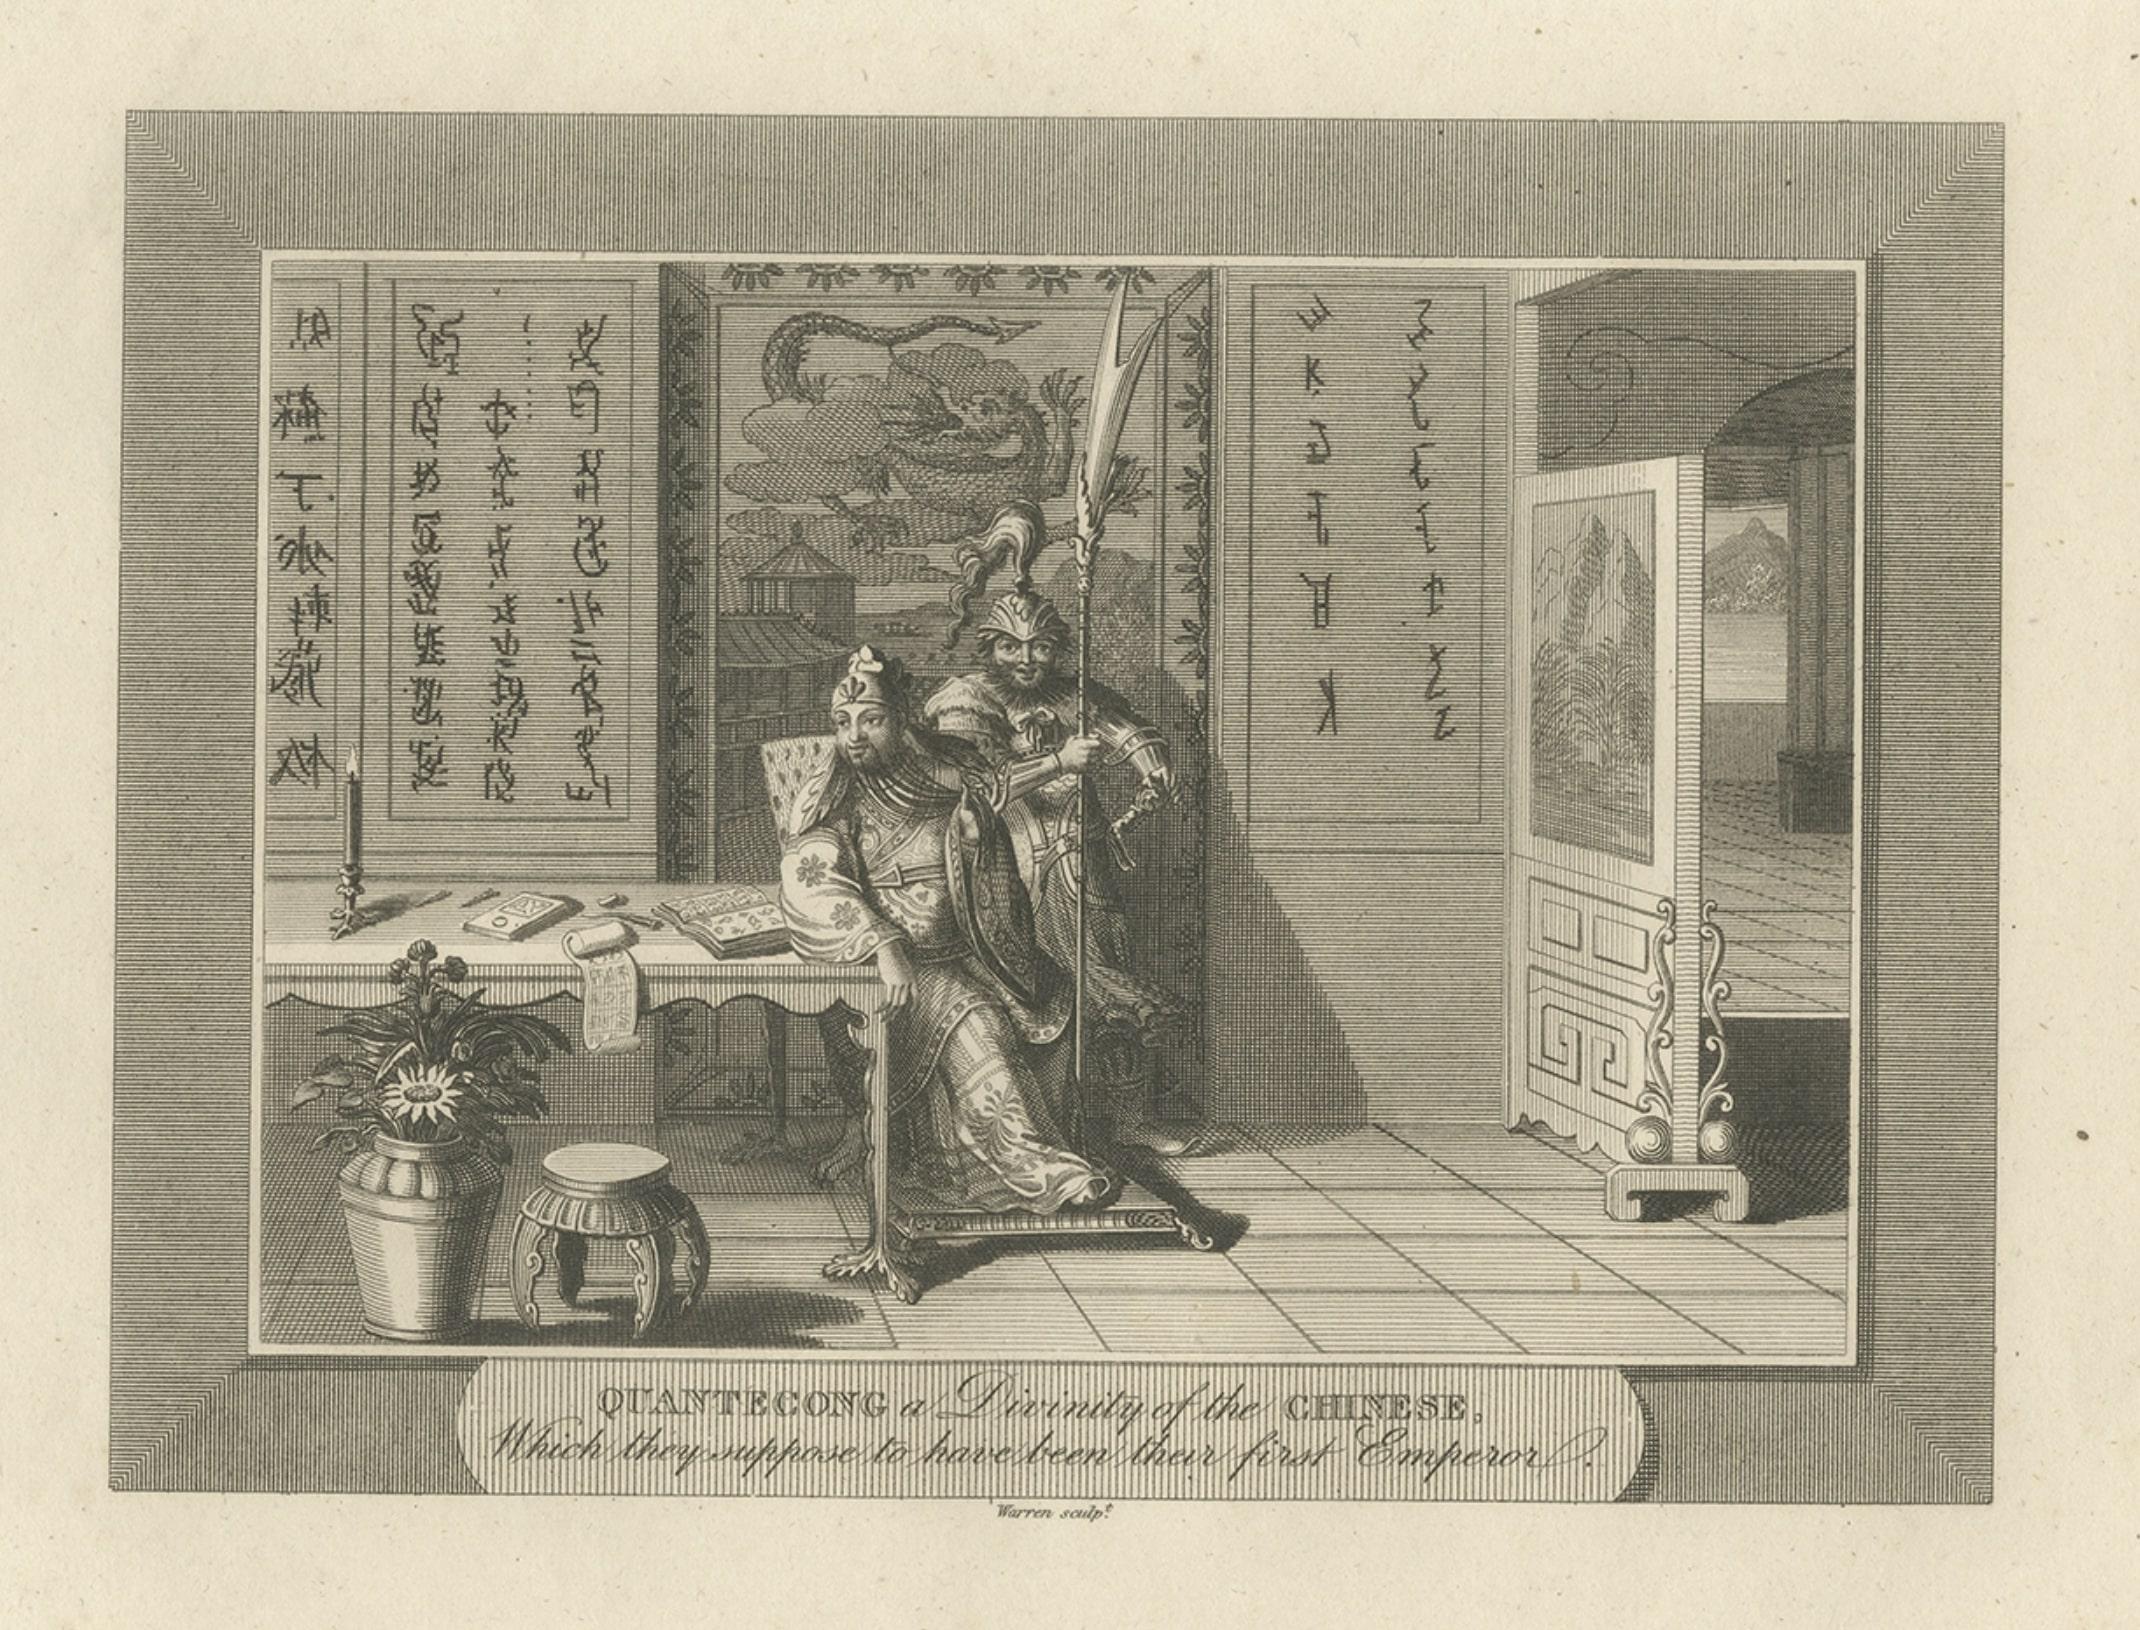 Antique print titled 'Quantecong, a divinity of the Chinese, which they suppose to have been their first Emperor'. 

Engraving of the deity Quante-Cong (or Shangdi), first ruler of China. This print originates from 'The World: or the Present State